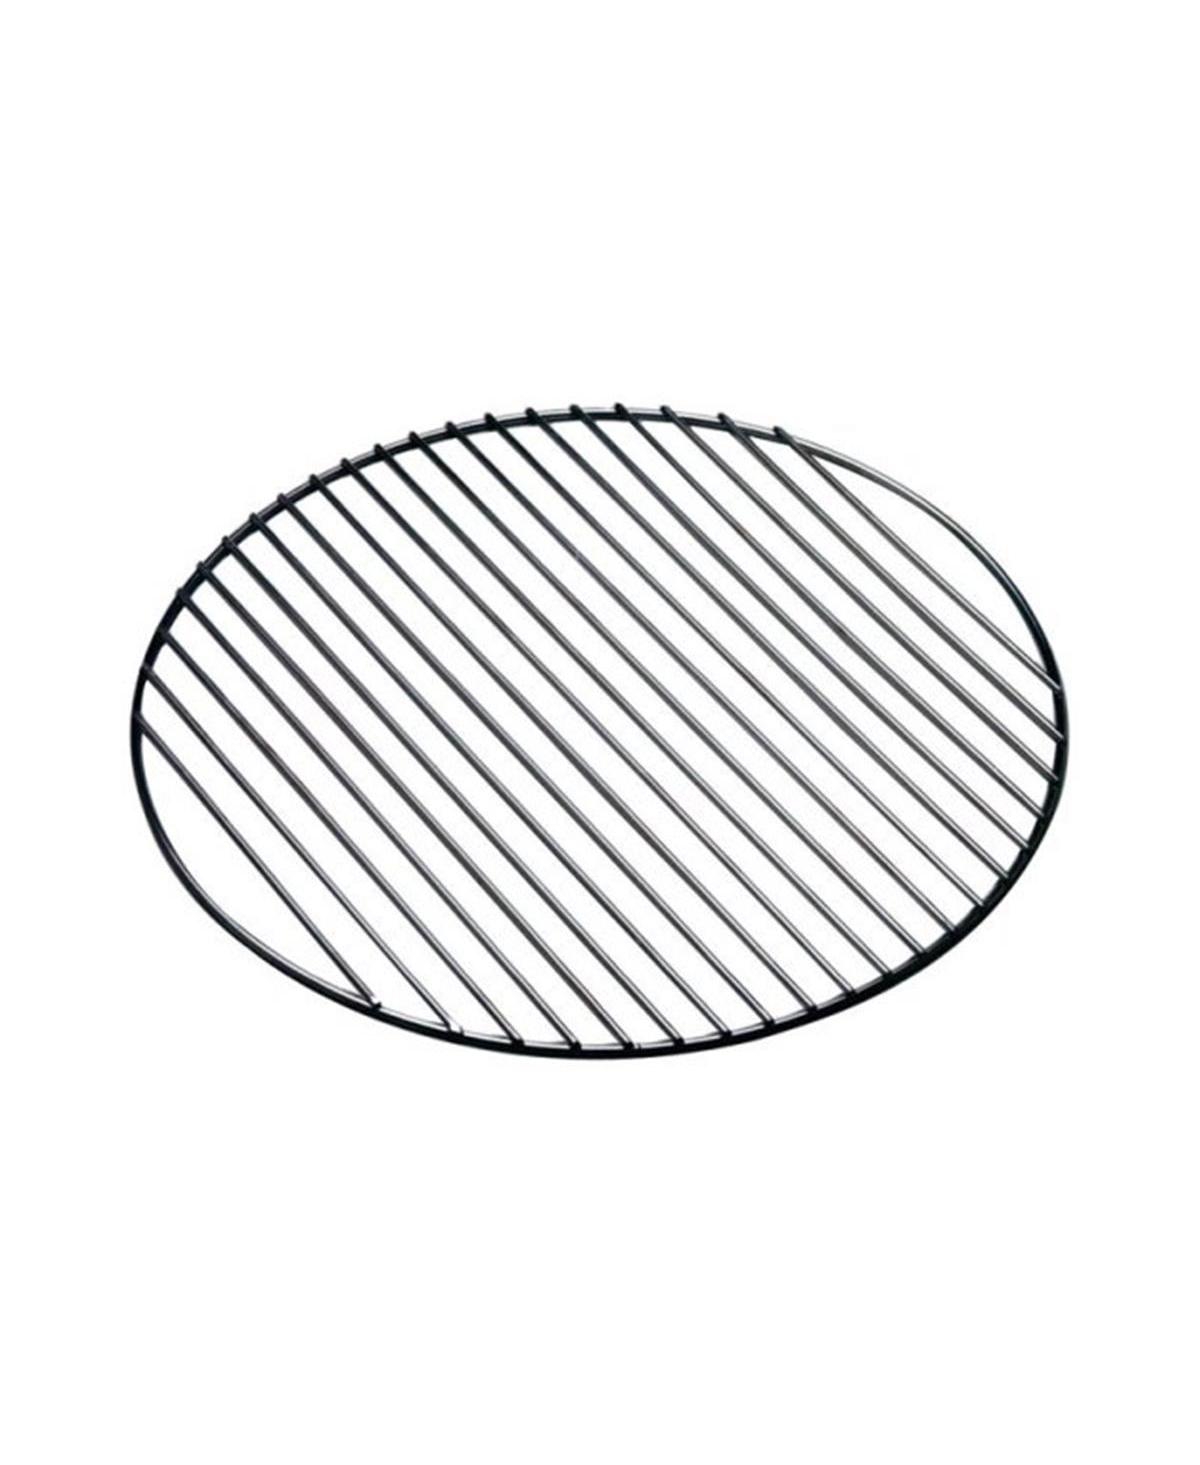 No.22TG Replacement Top Grill - Old Smokey - Silver